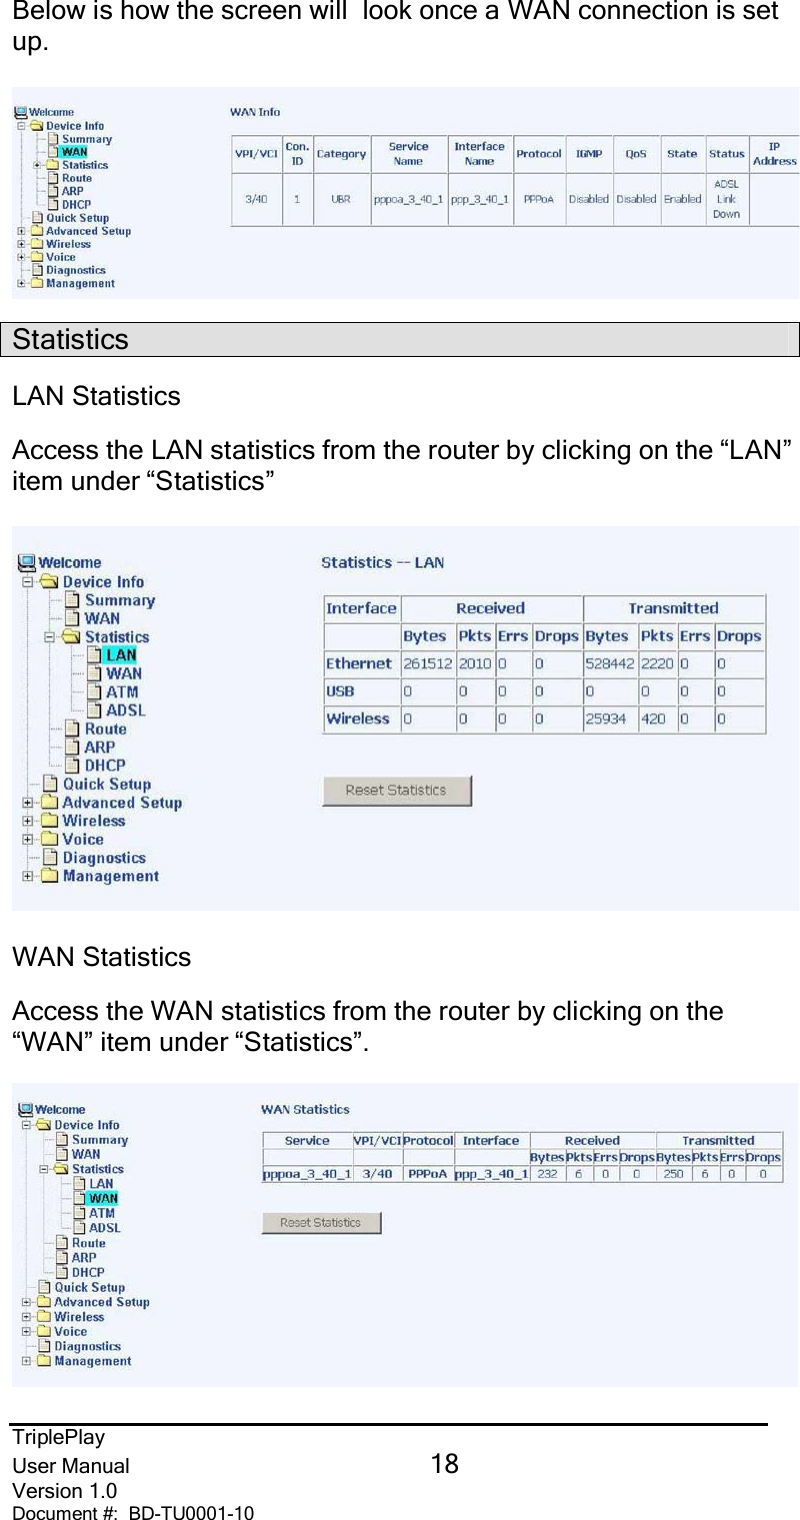 TriplePlayUser Manual 18Version 1.0Document #:  BD-TU0001-10Below is how the screen will  look once a WAN connection is setup.StatisticsLAN StatisticsAccess the LAN statistics from the router by clicking on the “LAN”item under “Statistics”WAN StatisticsAccess the WAN statistics from the router by clicking on the“WAN” item under “Statistics”.